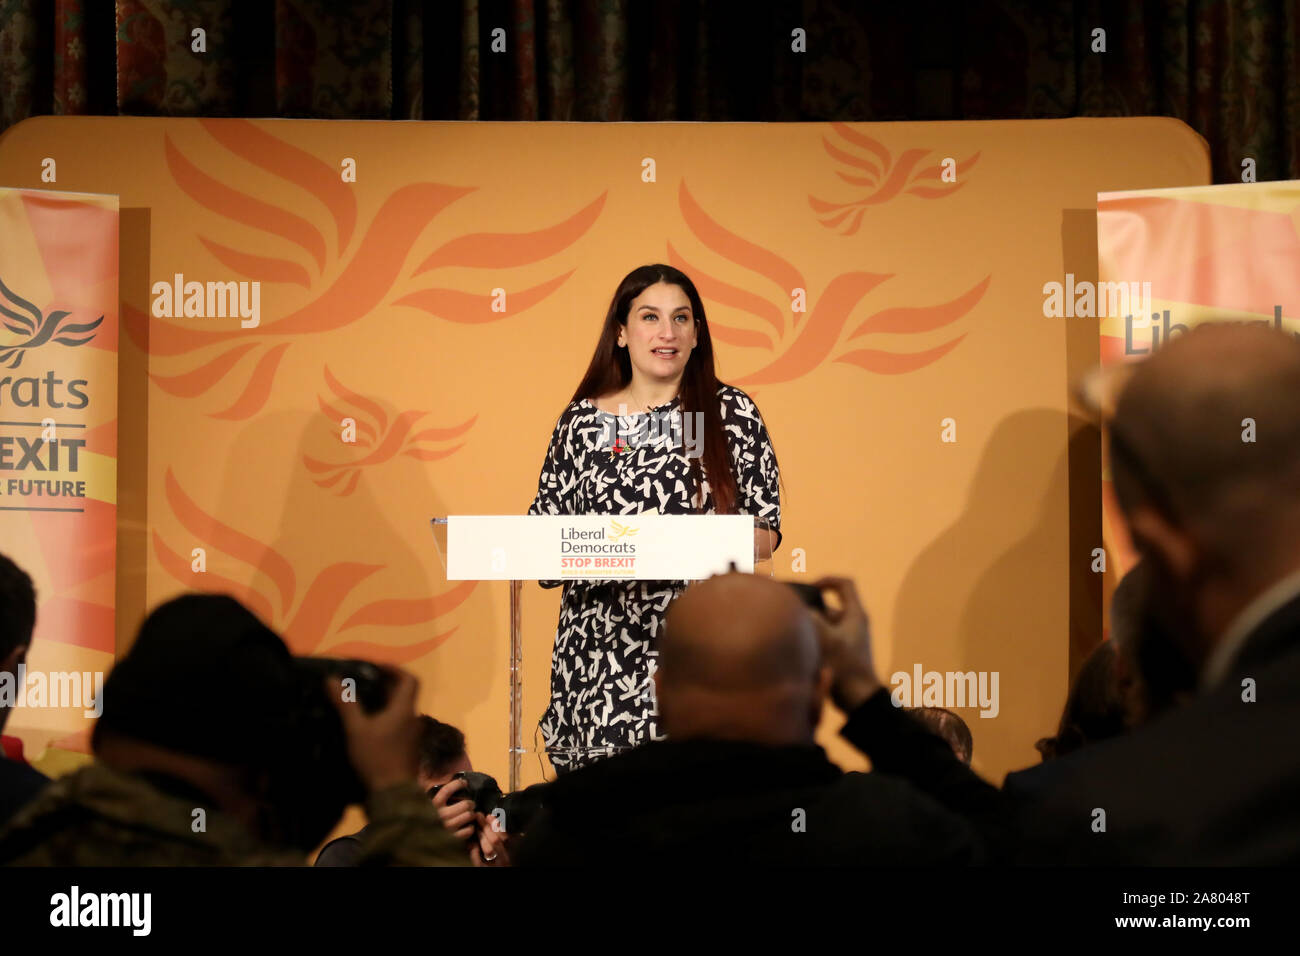 London / UK – November 5, 2019: Liberal Democrats MP Luciana Berger at the launch of party’s 2019 general election campaign at the Institution of Civil Engineers Stock Photo